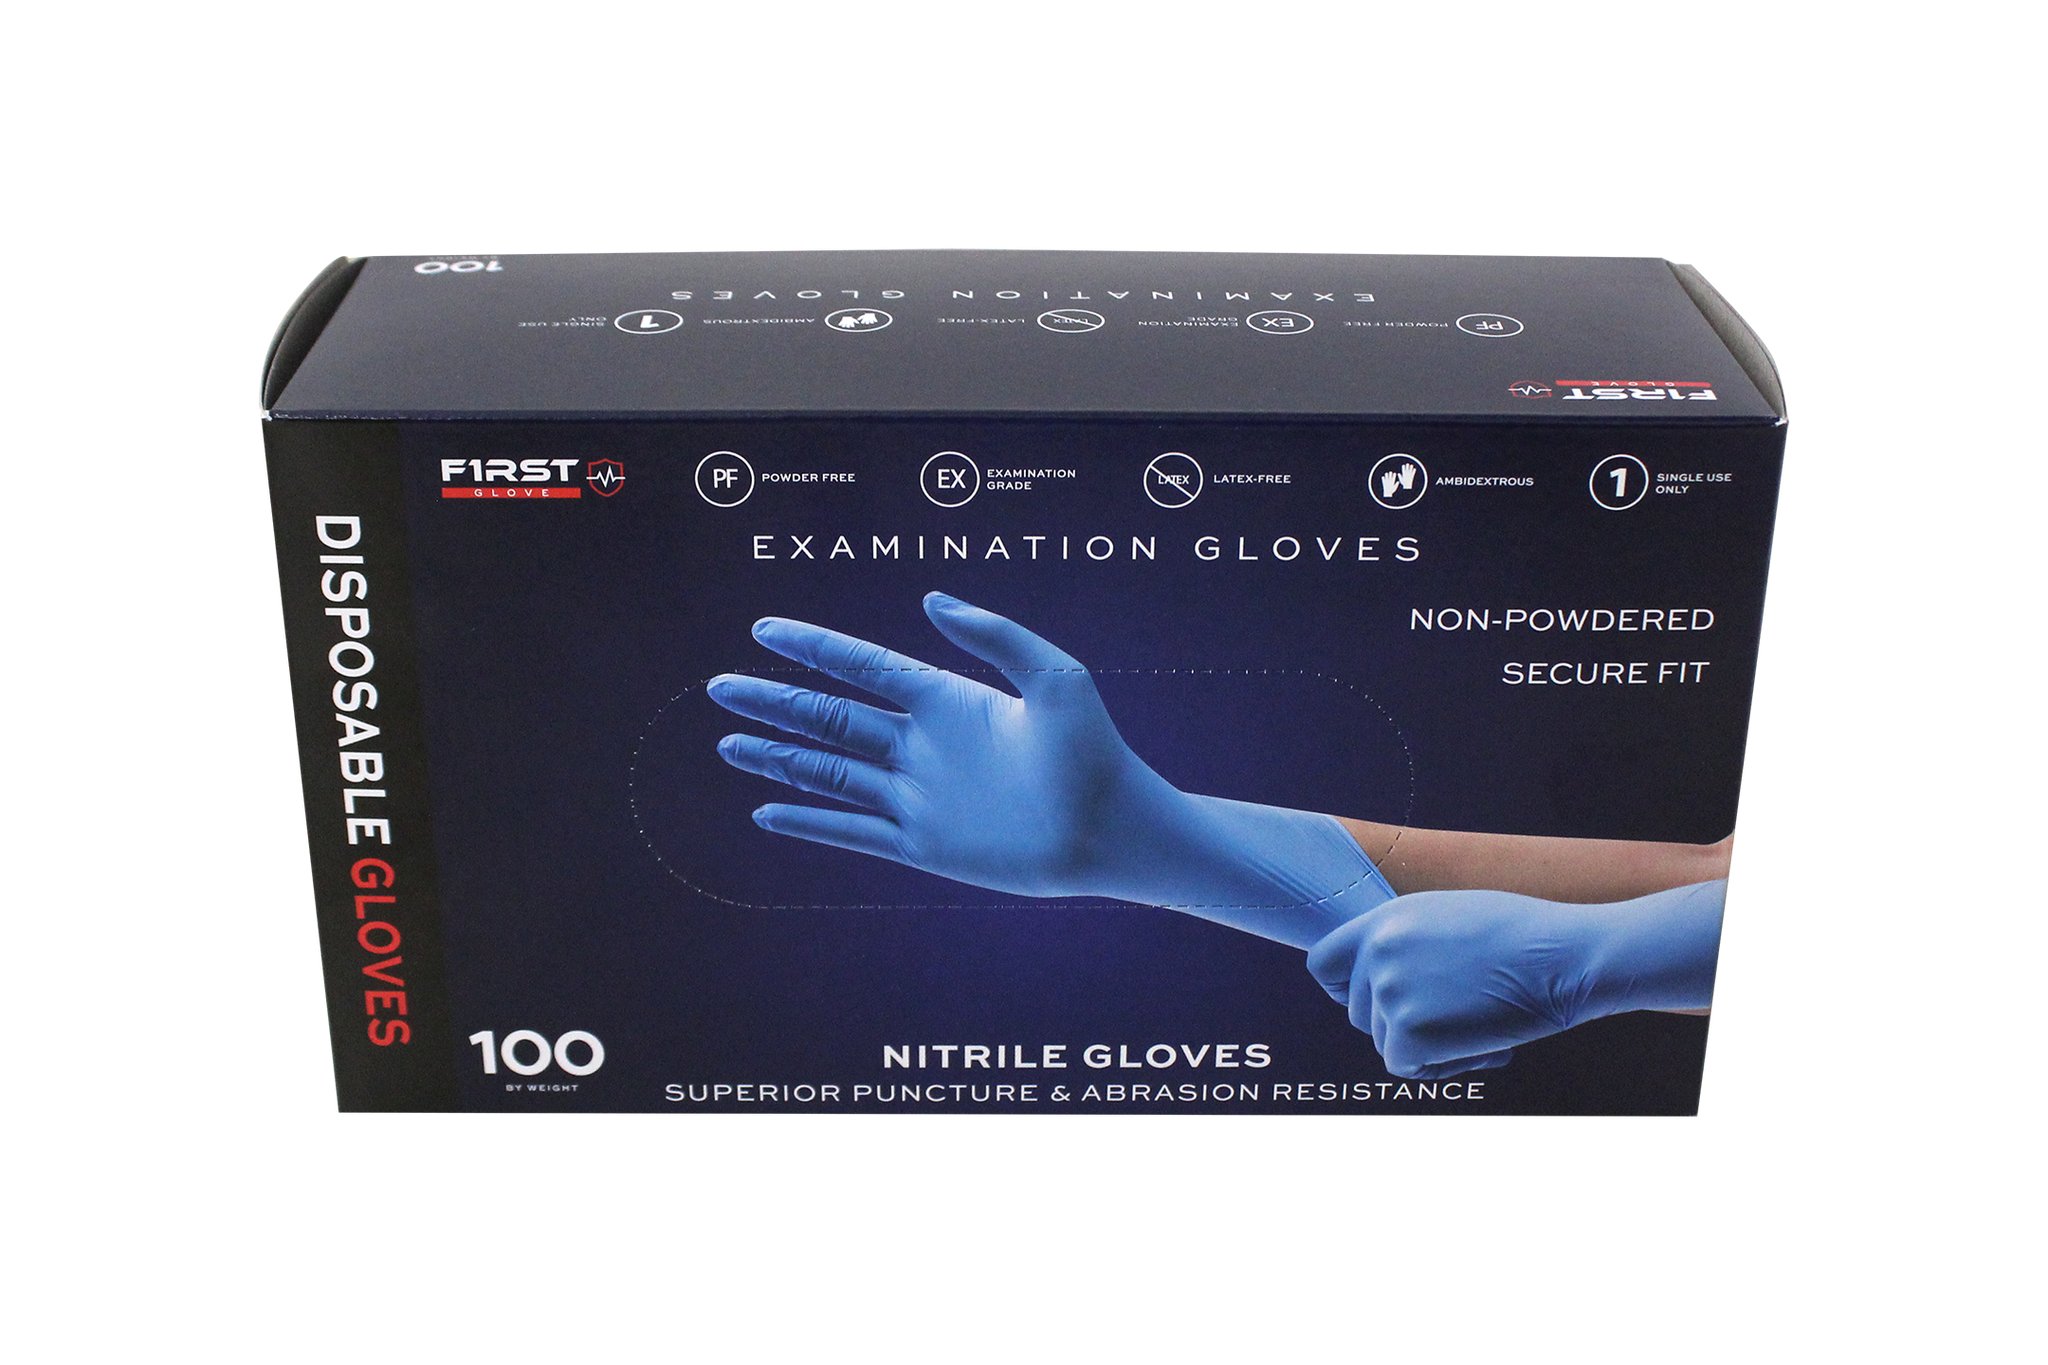 nitrile gloves for first responders, 1st choice indigo nitrile gloves, 1st choice black nitrile gloves, first choice nitrile gloves, 1st choice glove, first aid gloves, rubber exam gloves disposable, first aid kit gloves